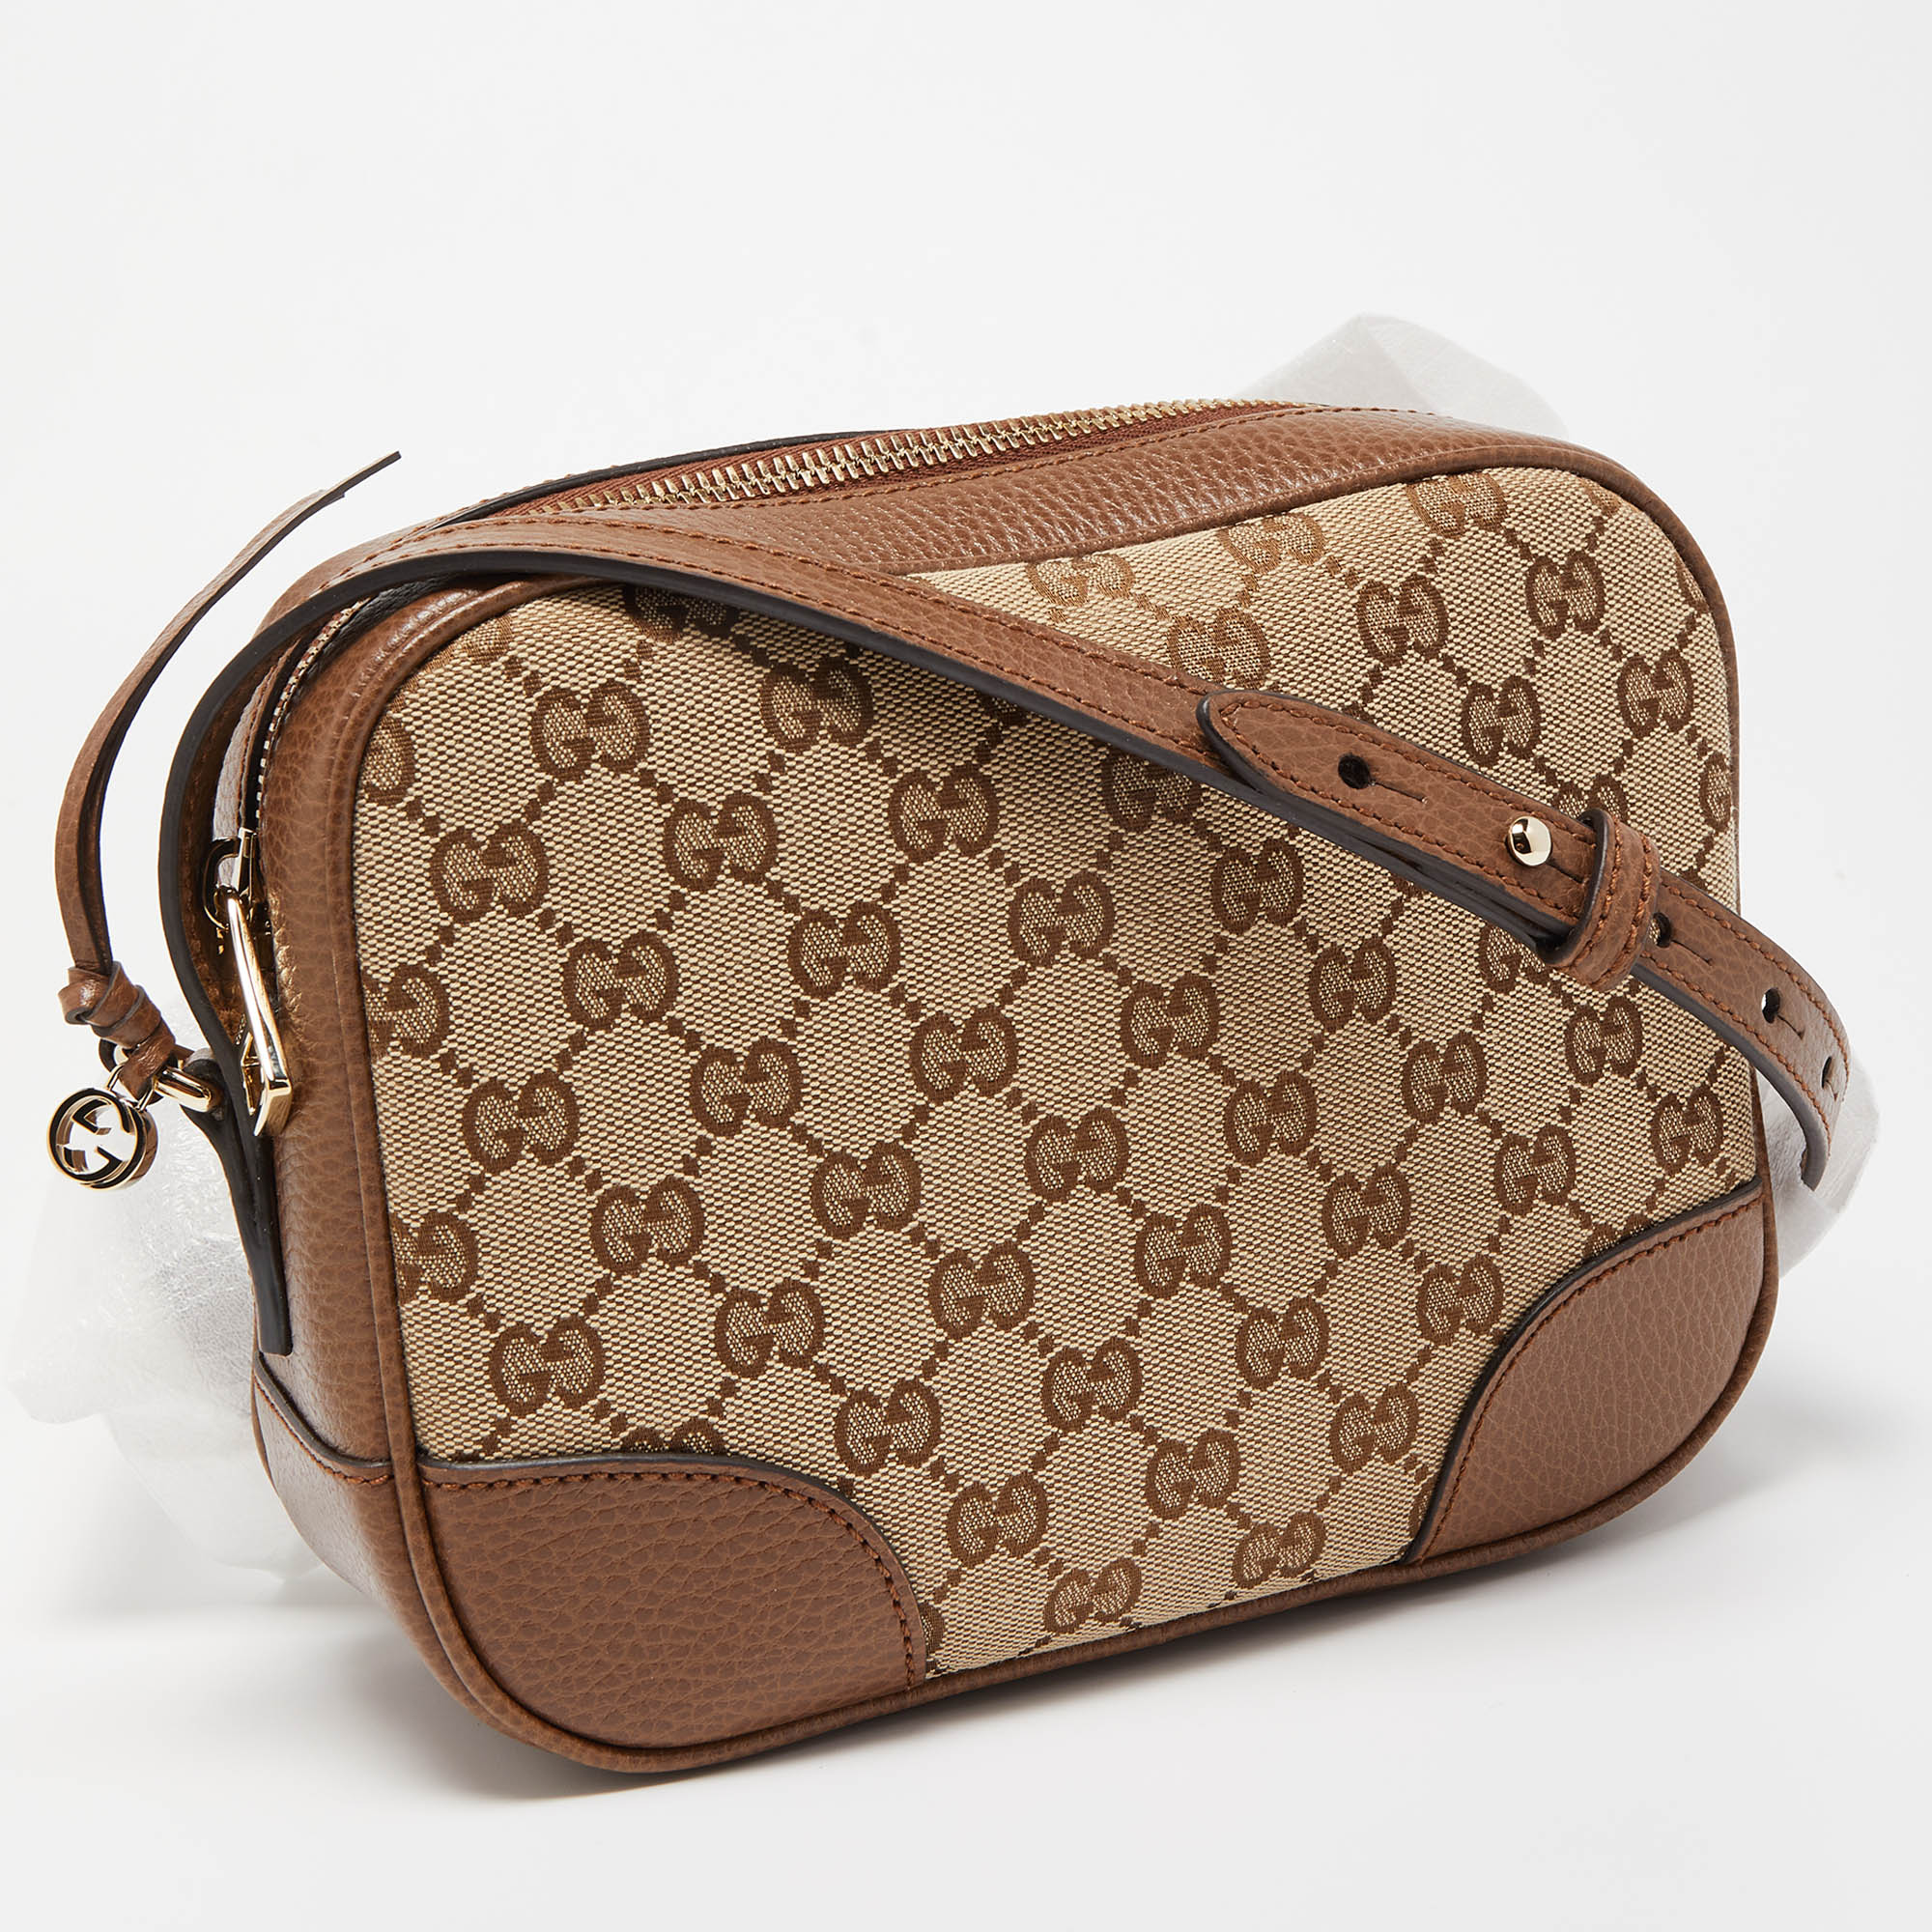 Gucci Brown/Beige GG Canvas And Leather Bree Crossbody Bag